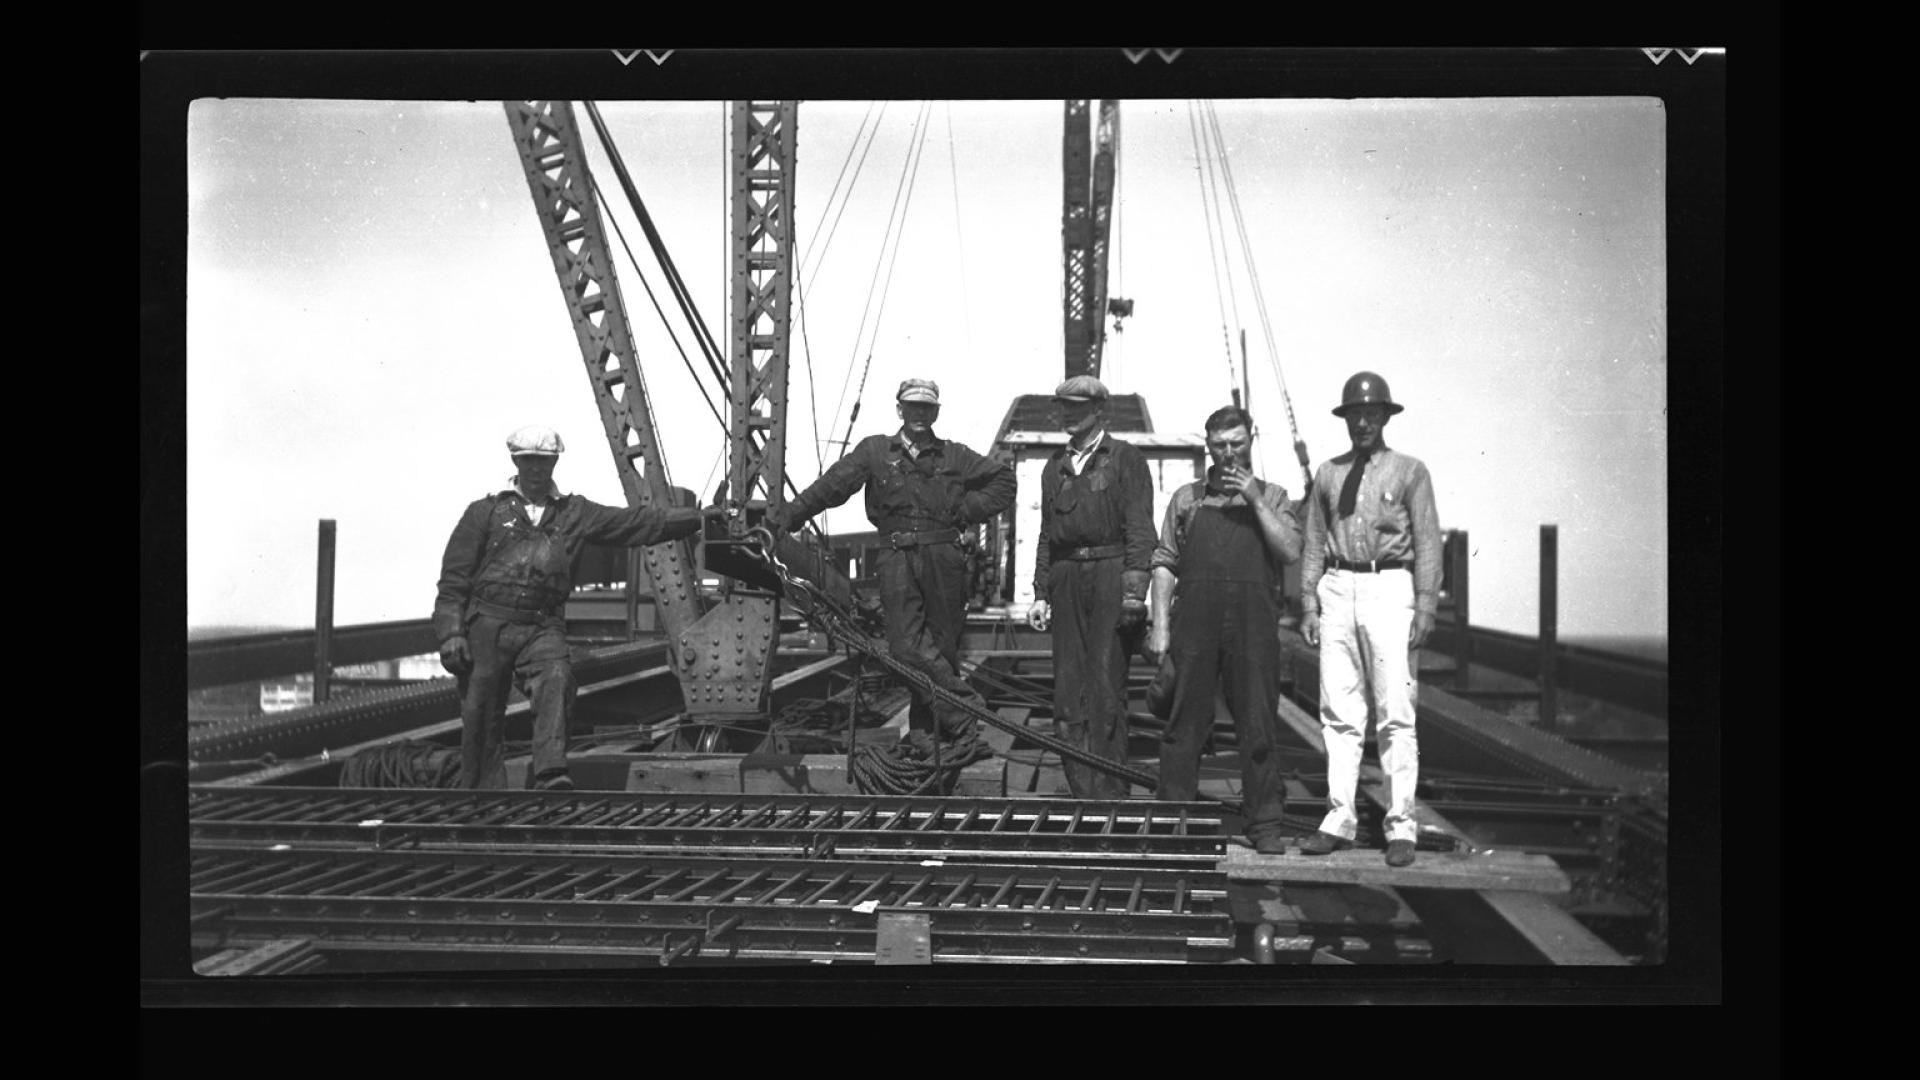 Construction crew on top of bridge being constructed. There is heavy construction machinery in the background